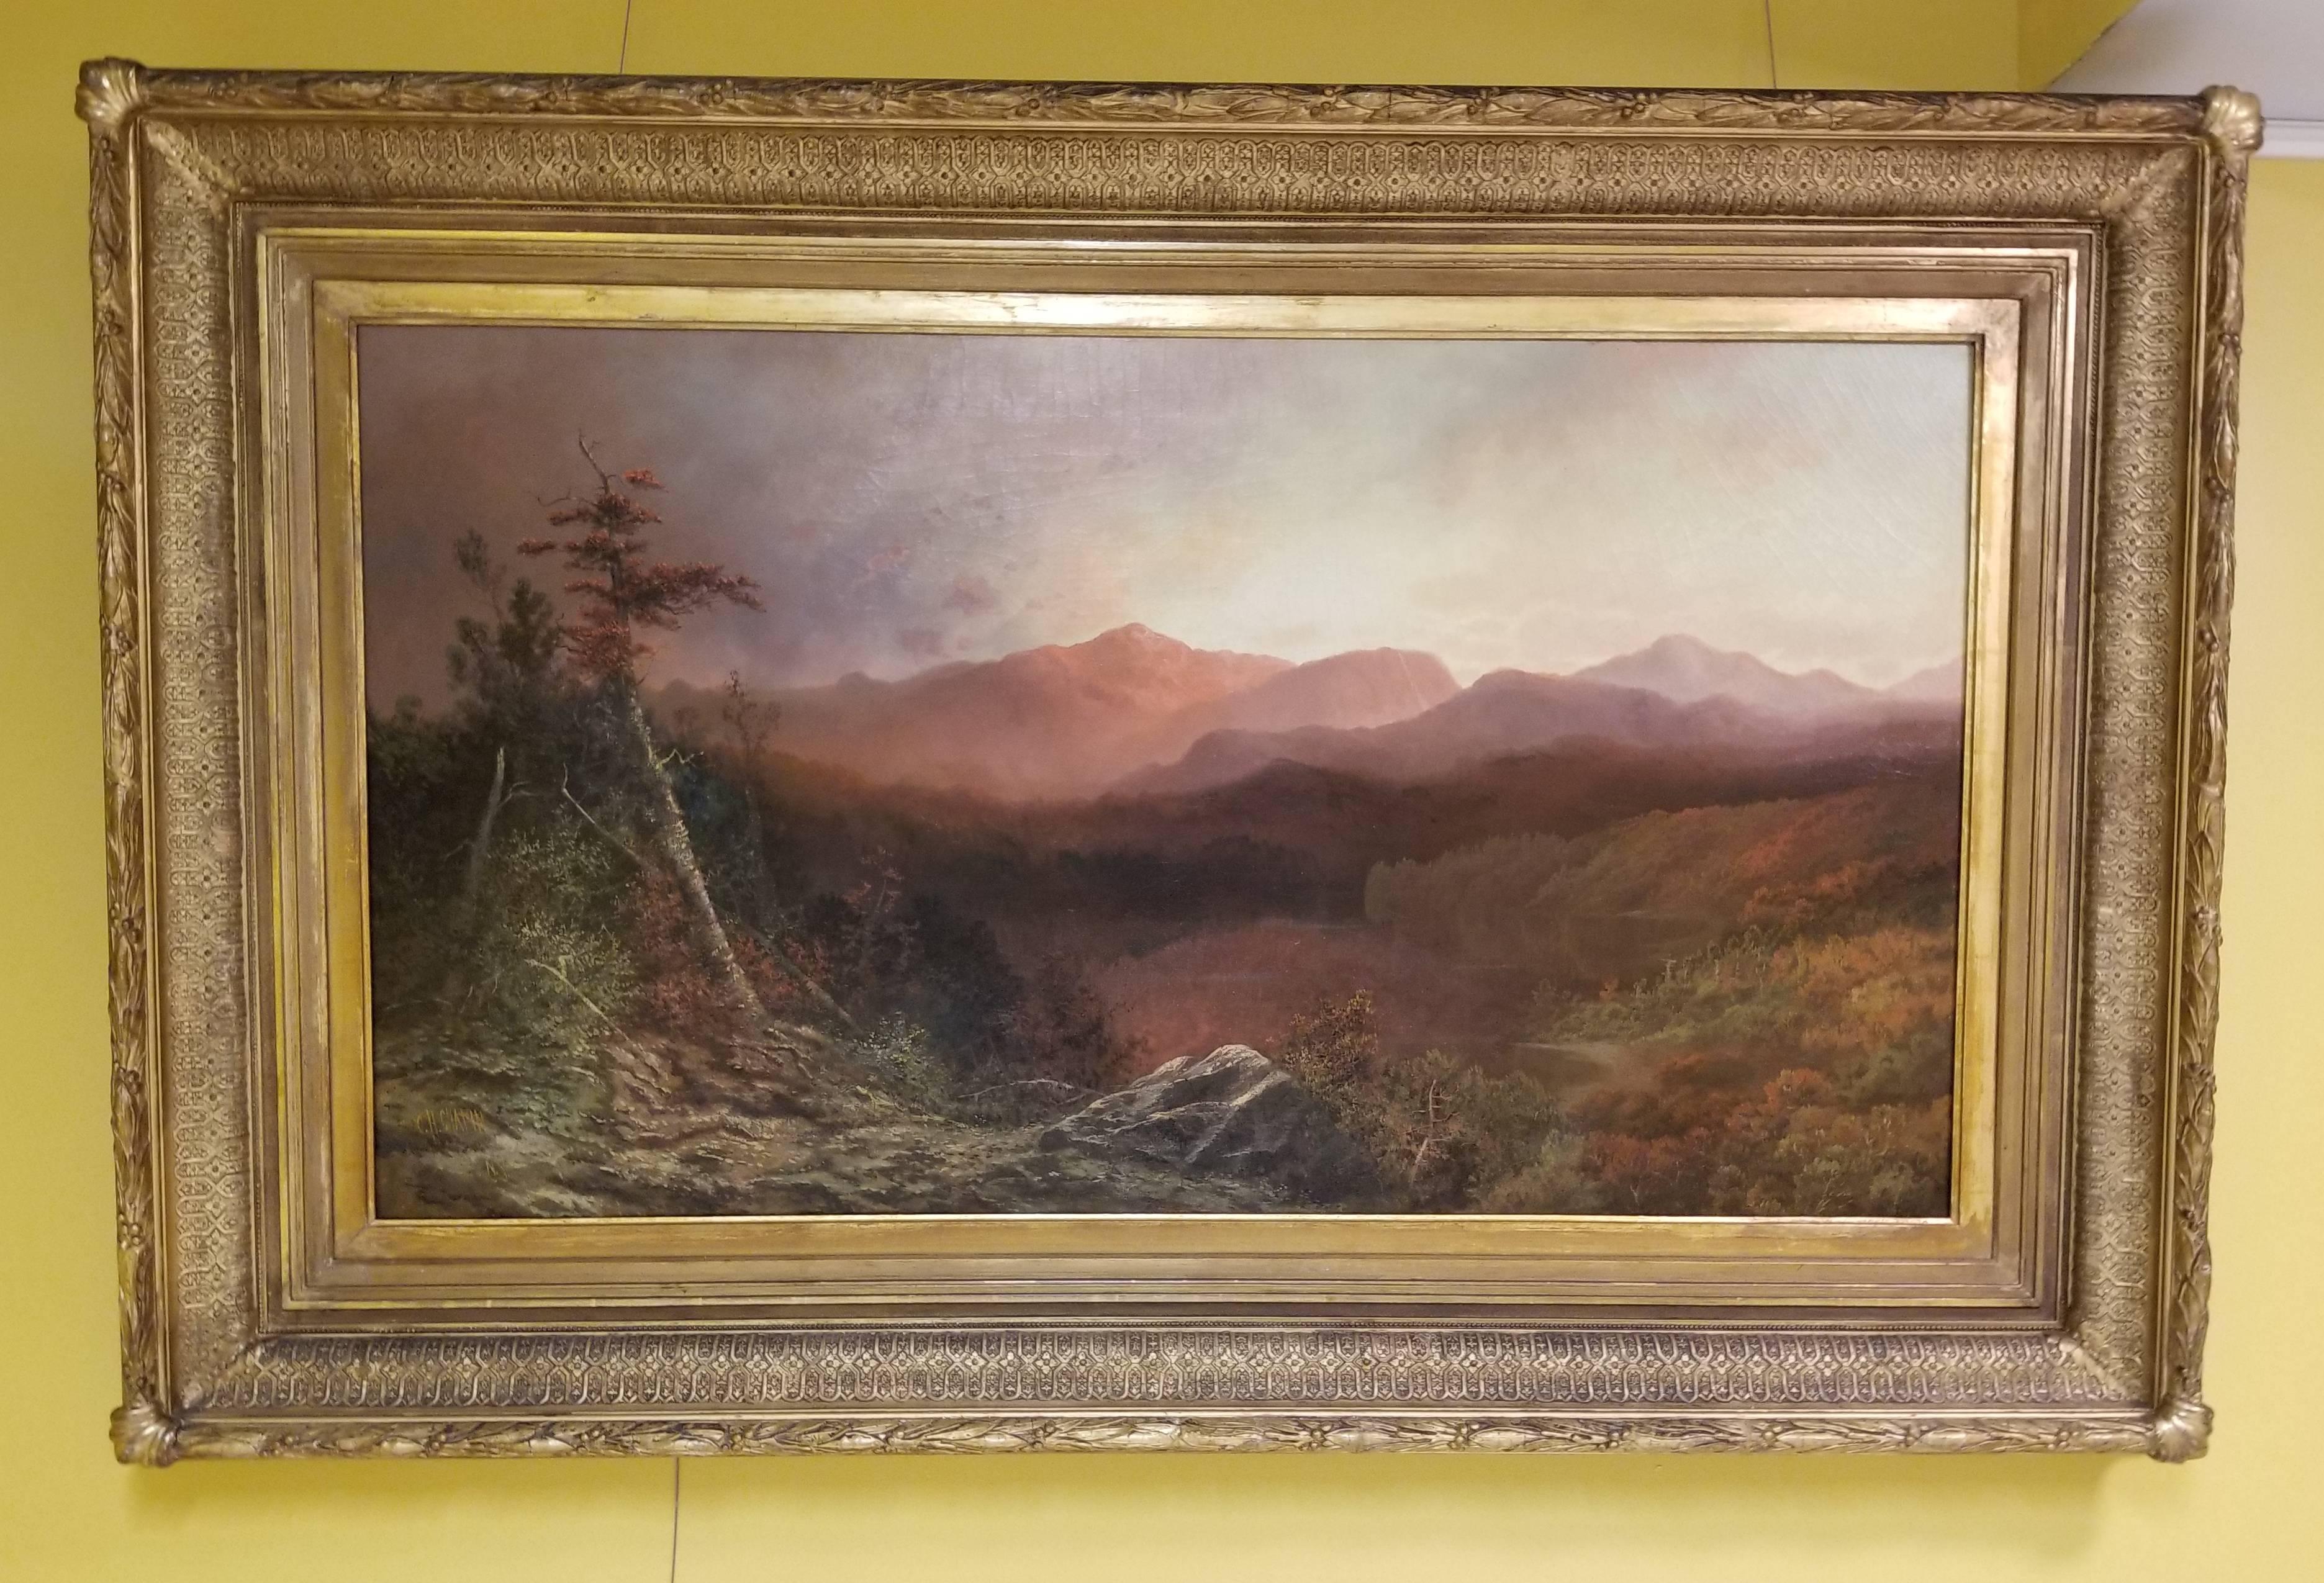 High Peaks in the Adriondacks - Painting by Charles H. Chapin